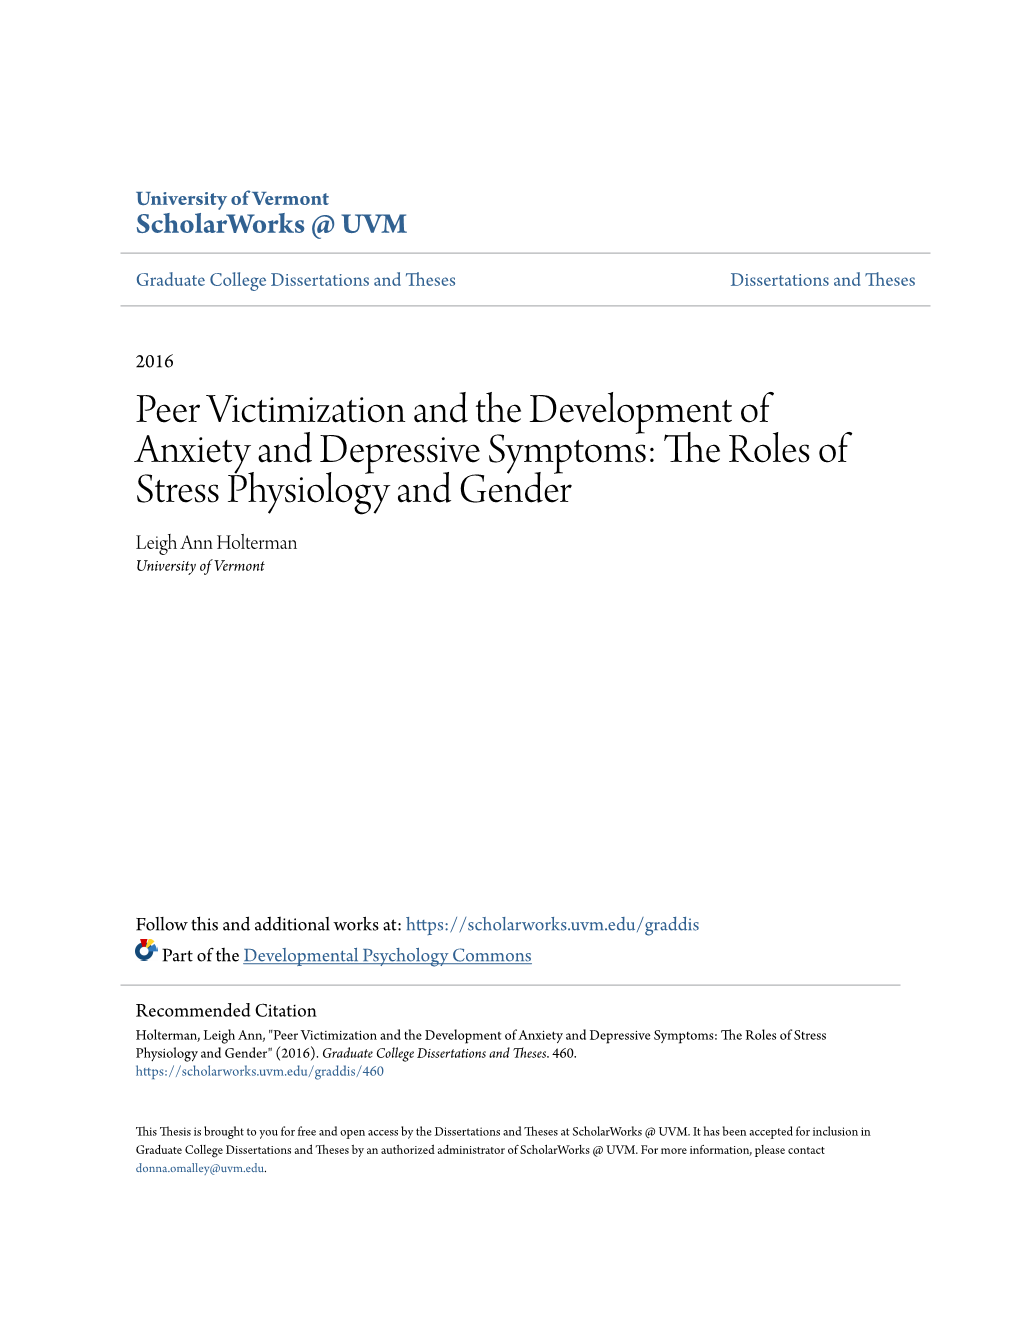 Peer Victimization and the Development of Anxiety and Depressive Symptoms: the Roles of Stress Physiology and Gender Leigh Ann Holterman University of Vermont